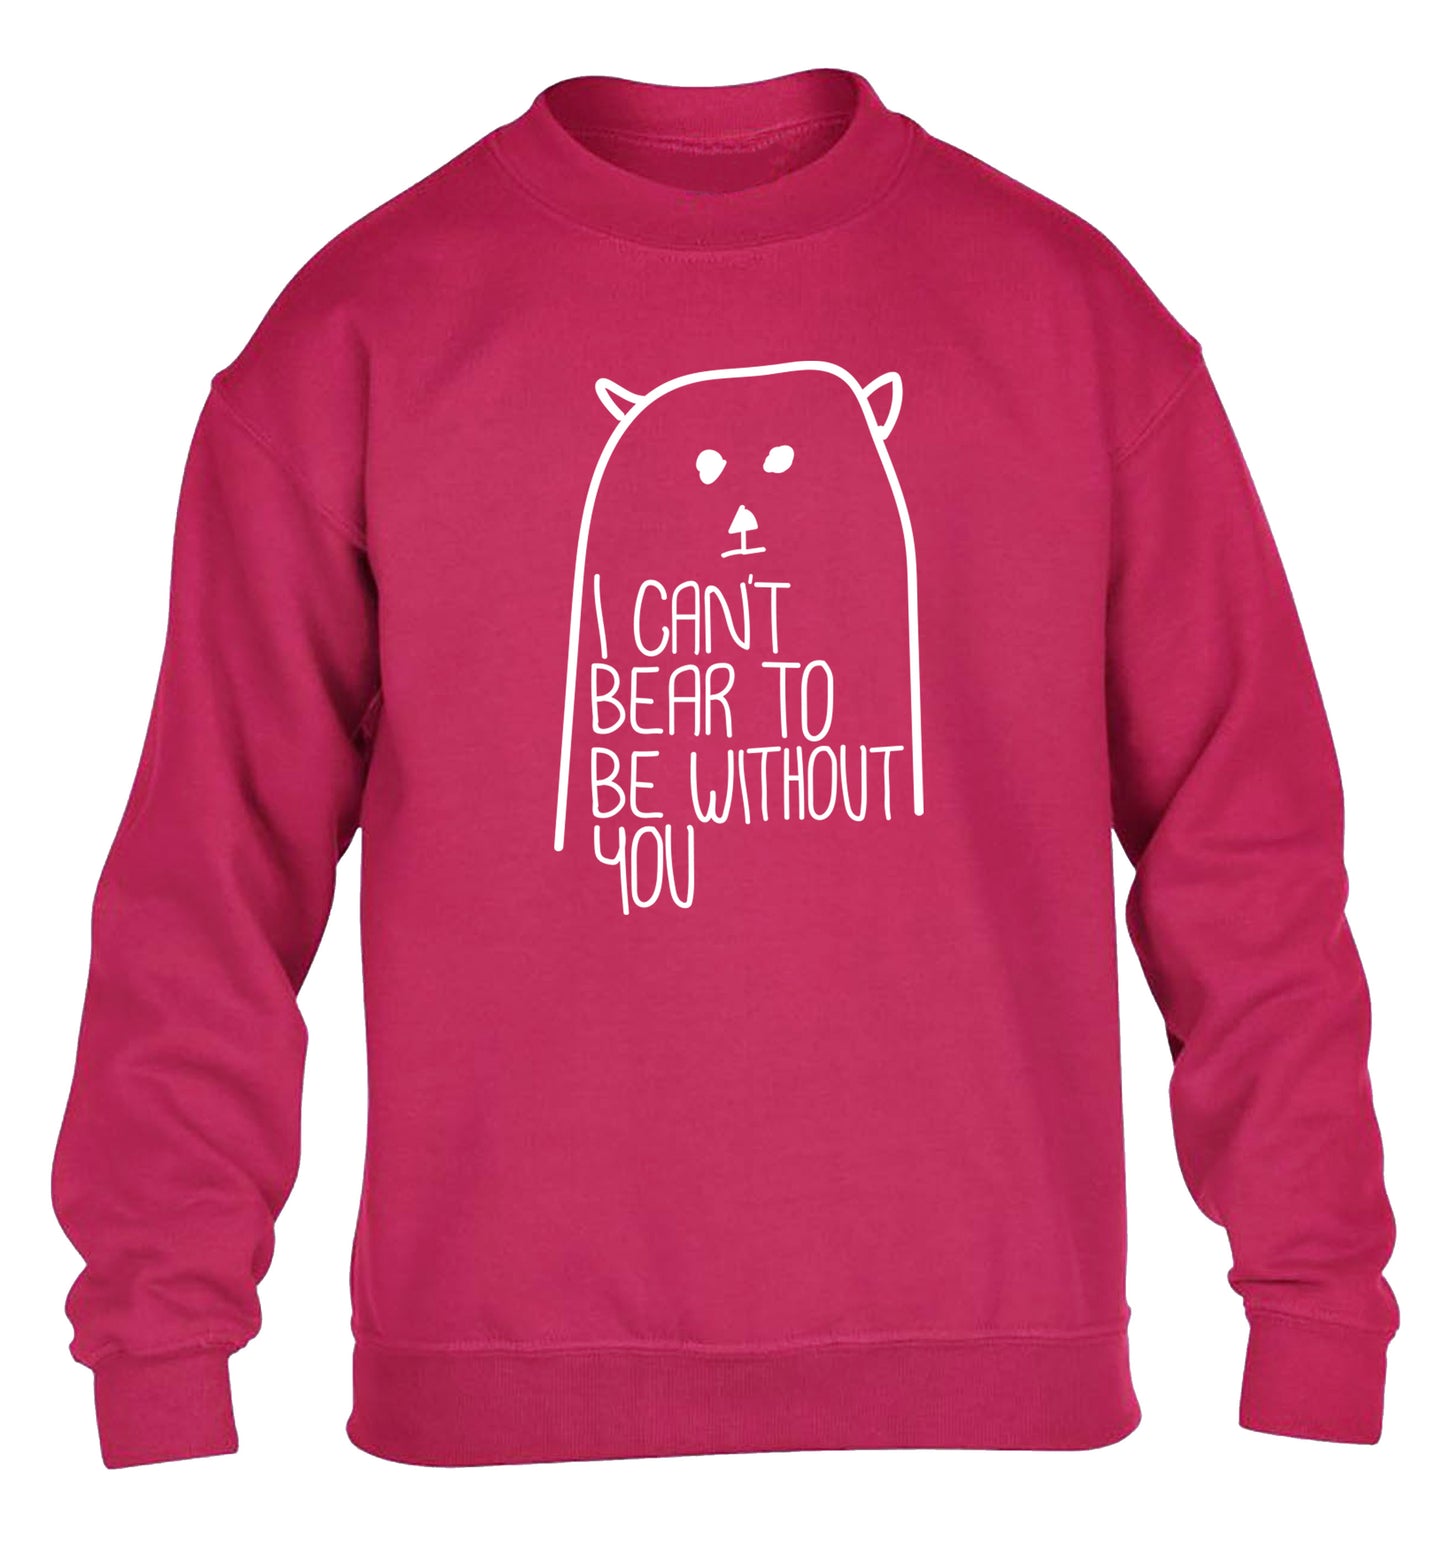 I can't bear to be without you children's pink sweater 12-13 Years